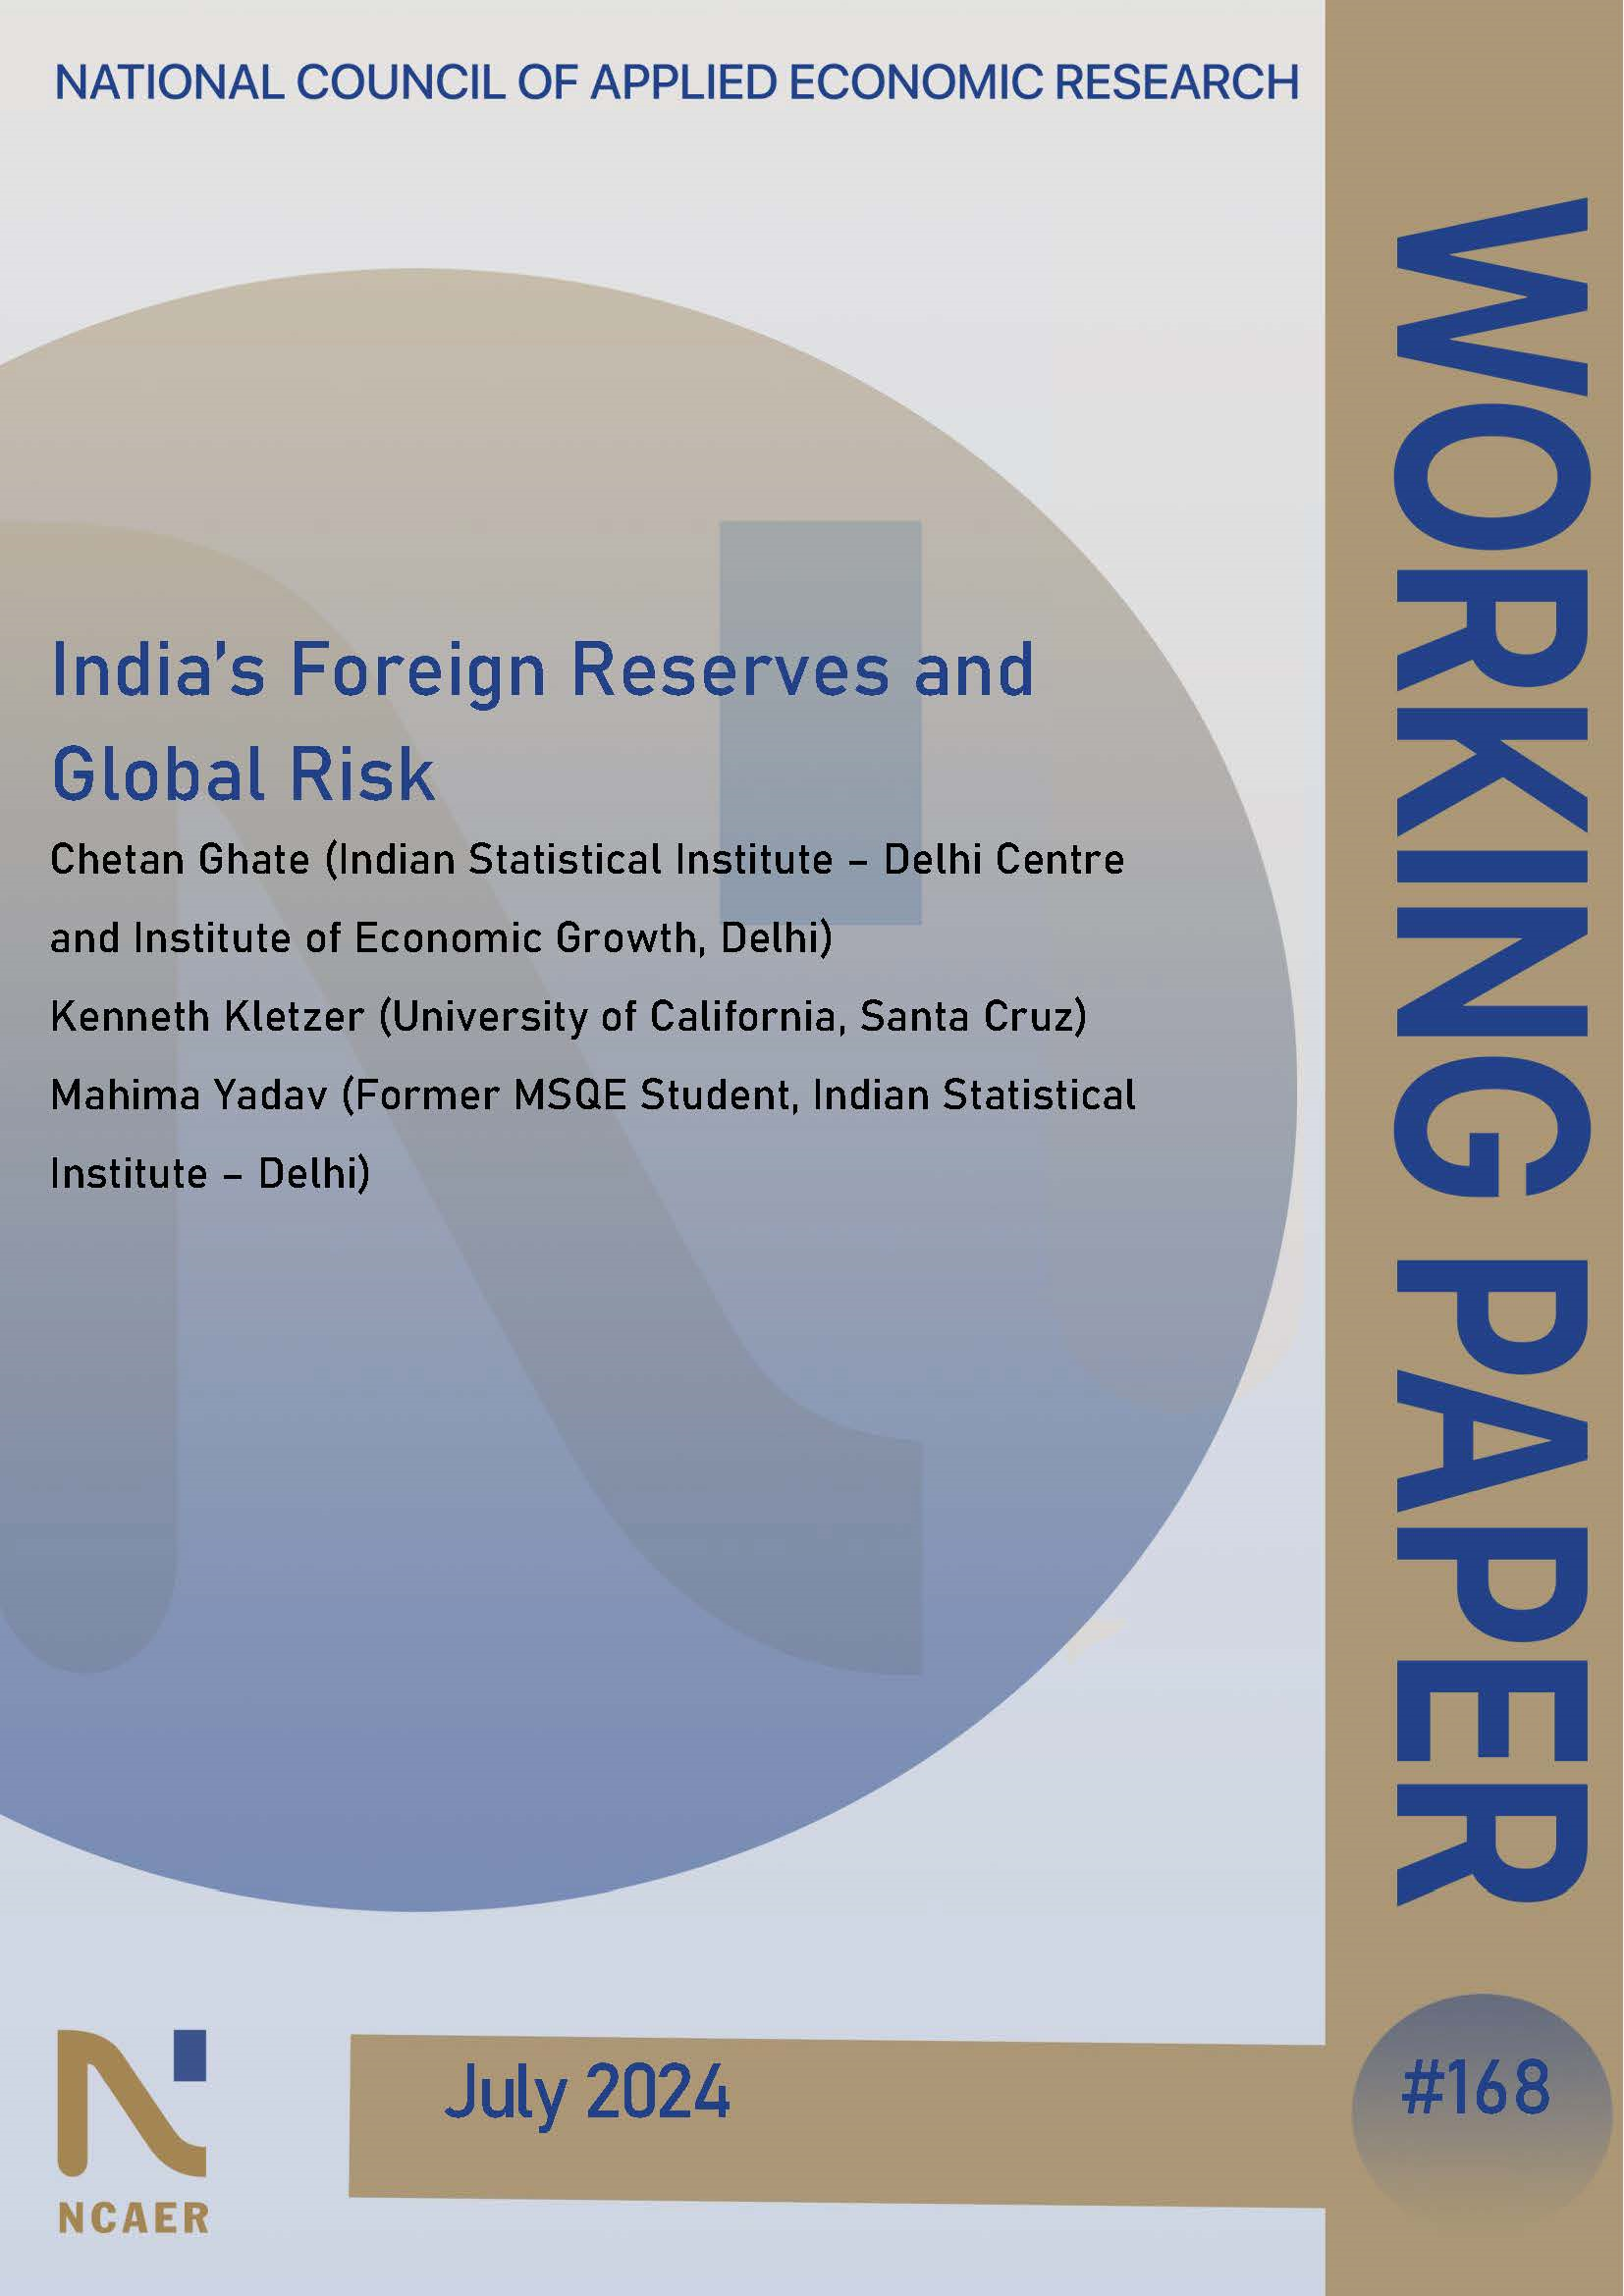 India’s Foreign Reserves and Global Risk